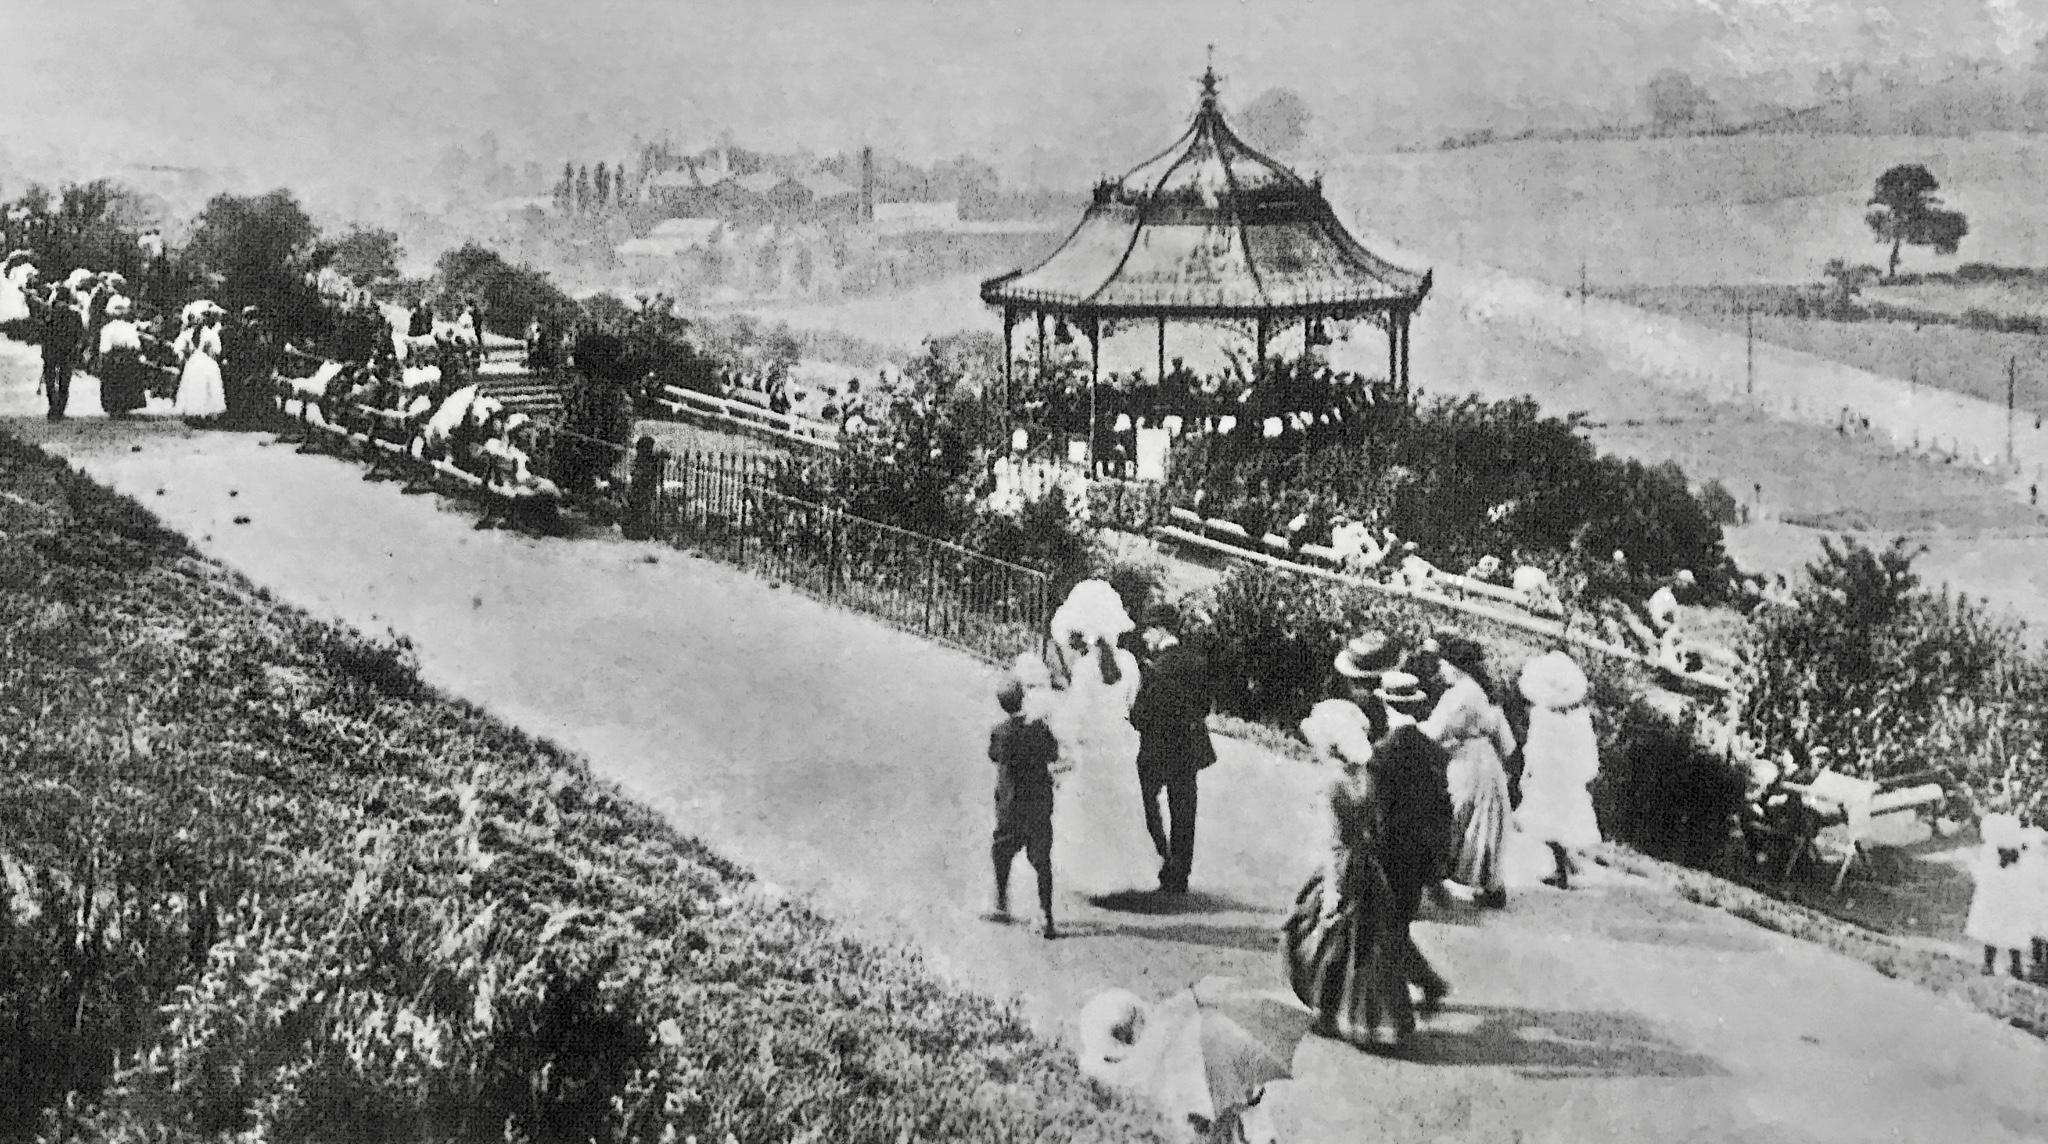 Woodhouse Ridge, with Bandstand, early 1900s